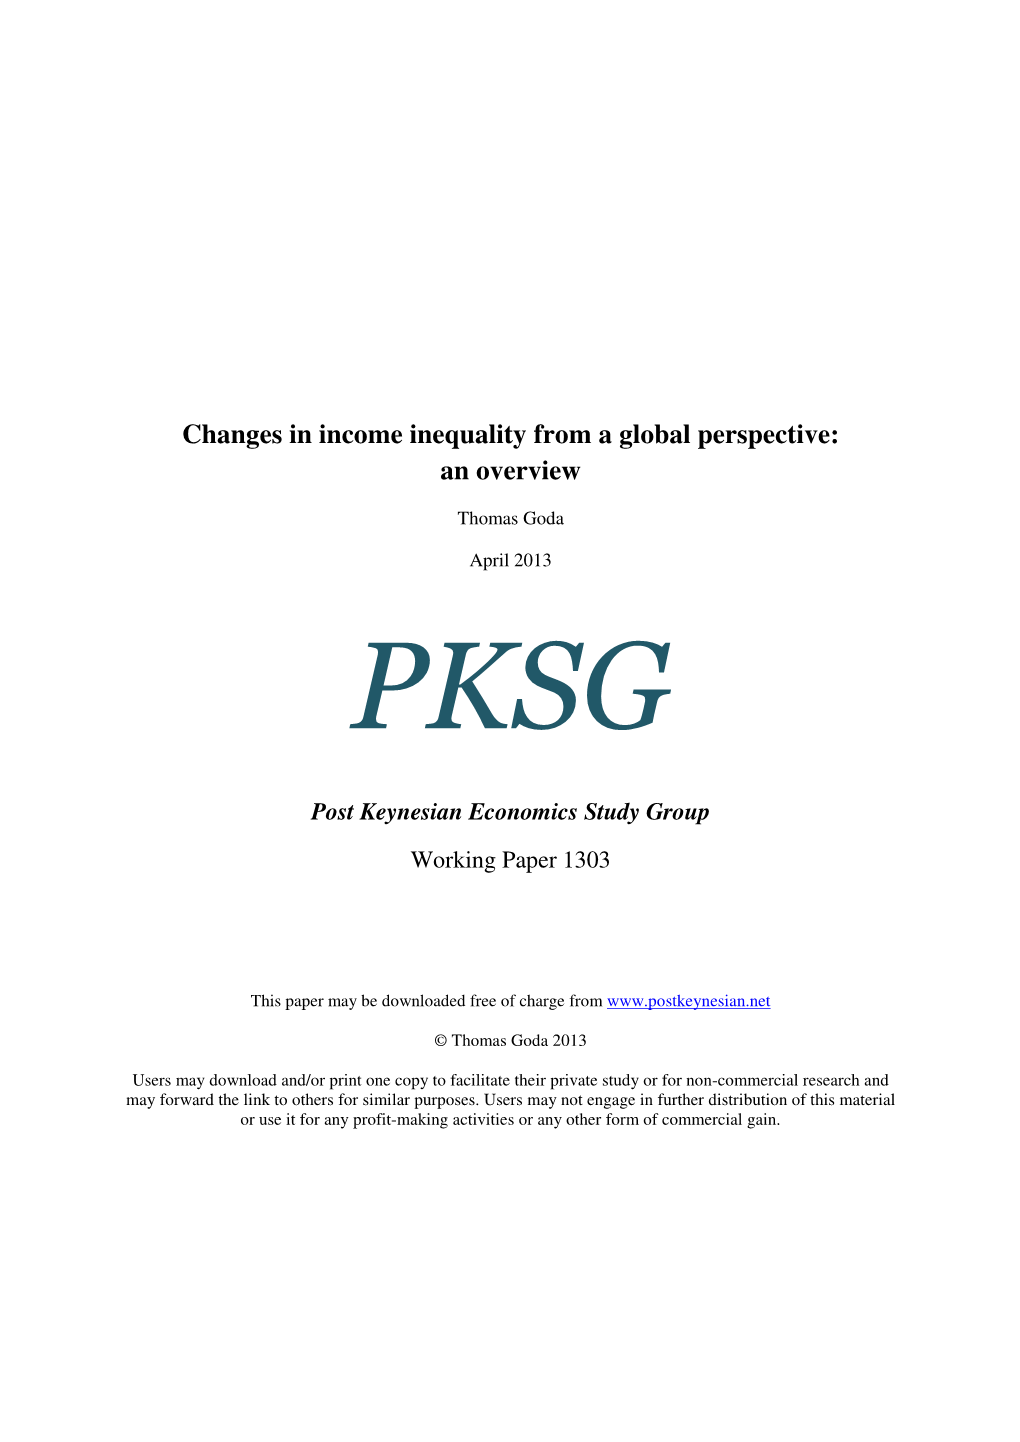 Changes in Income Inequality from a Global Perspective: an Overview